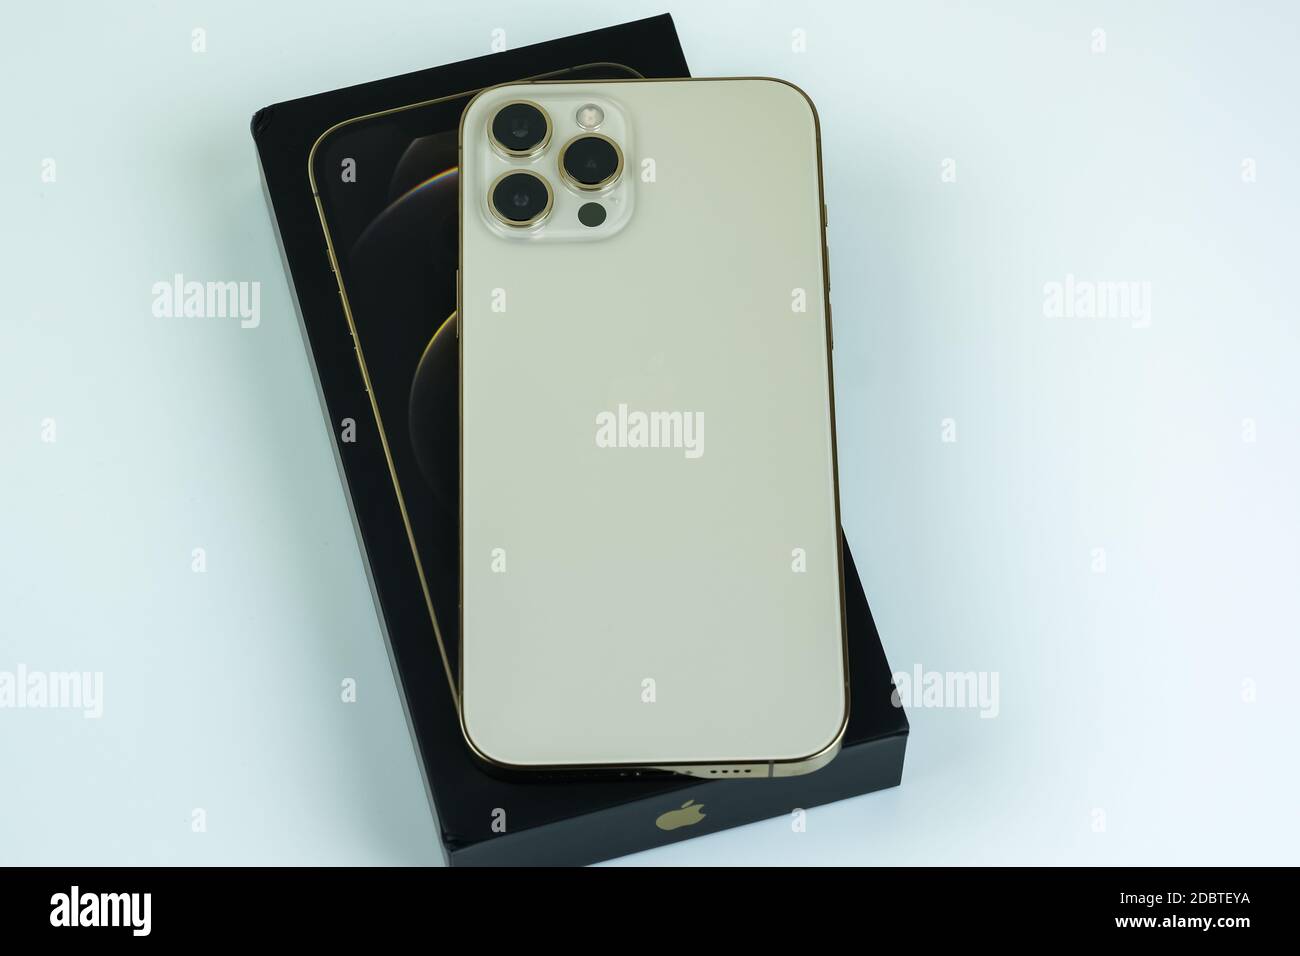 Iphone 12 Pro Max In Gold Next To Its Box Stock Photo Alamy